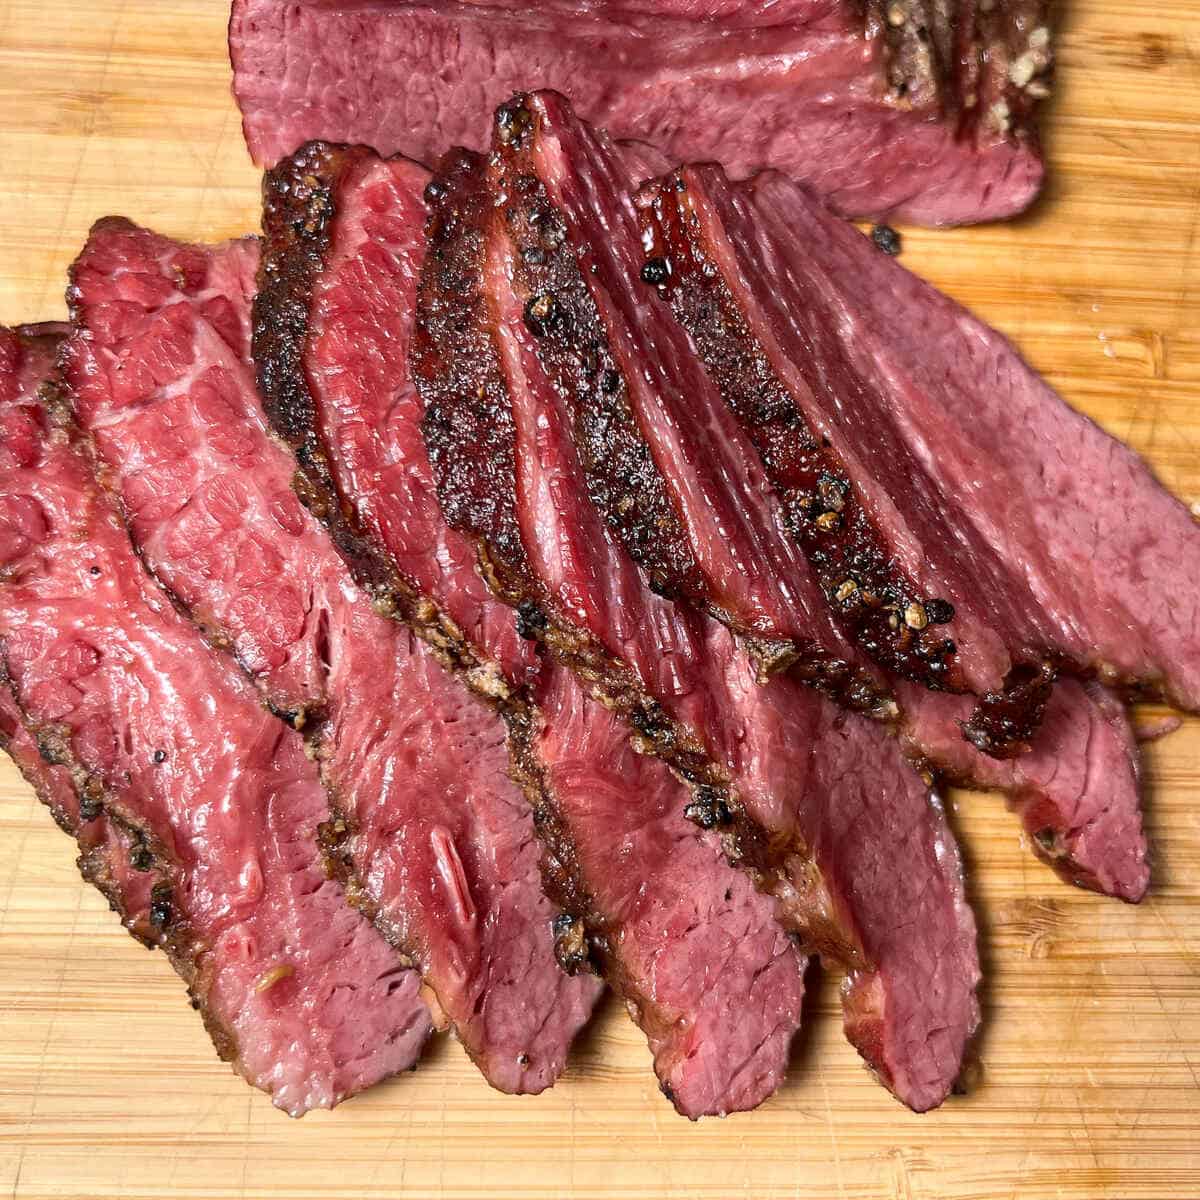 slices of smoked corned beef brisket on a wooden cutting board